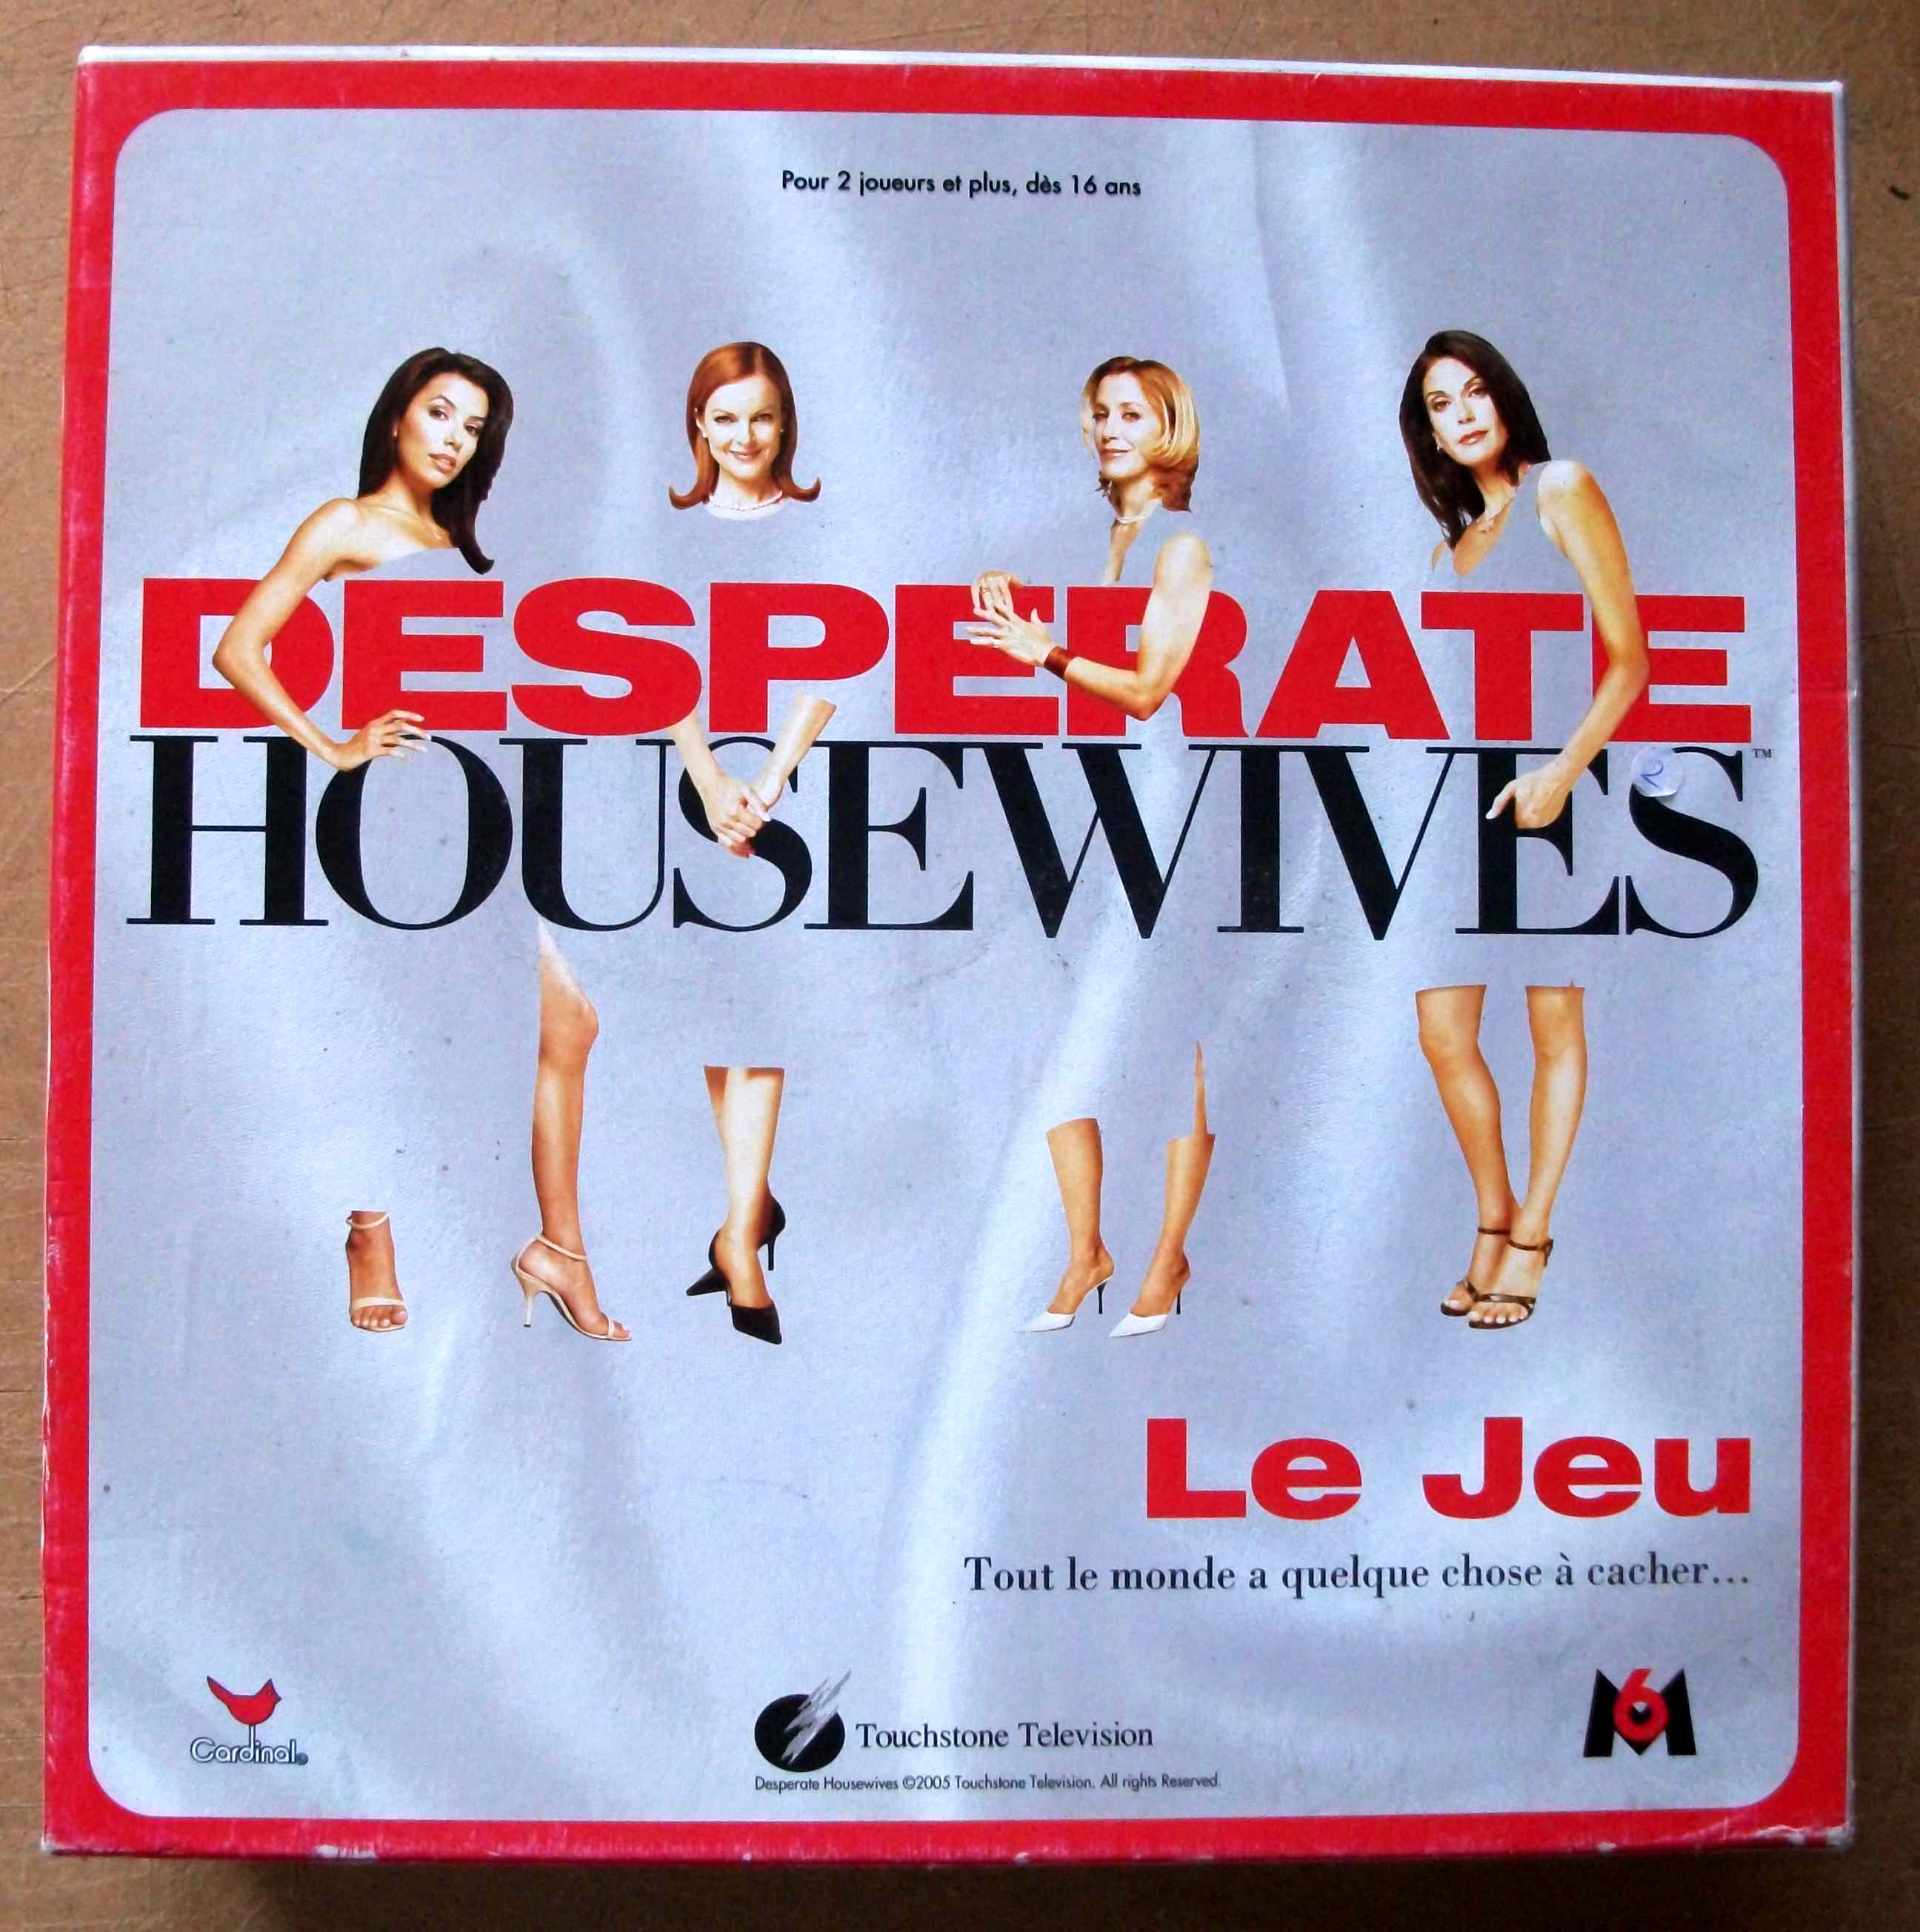 Desesperate Housewives le jeu